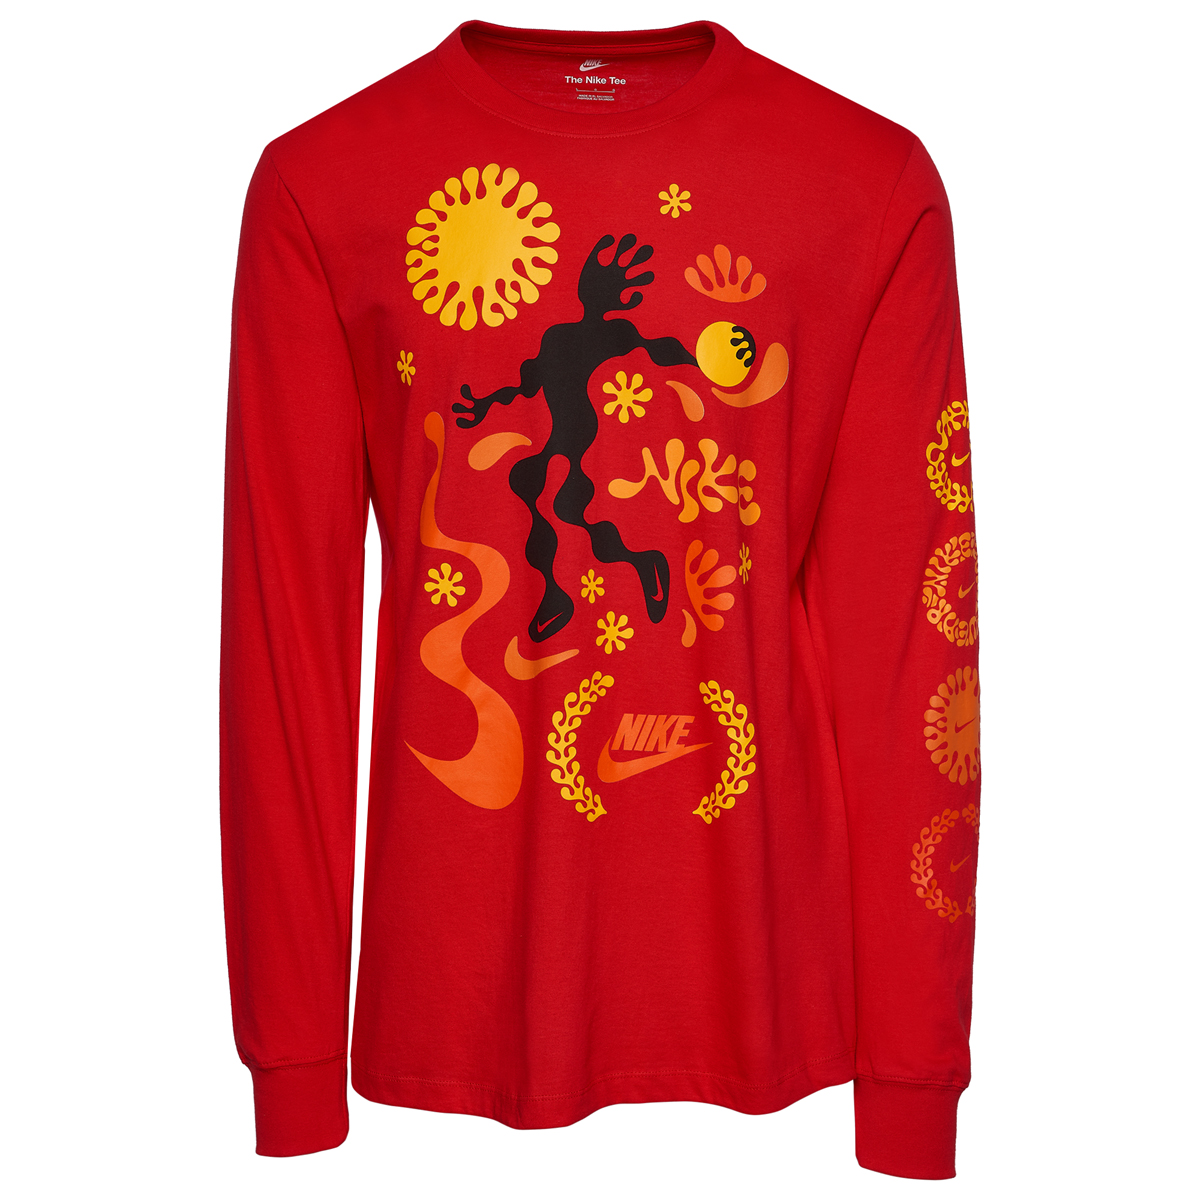 Nike-Squiggles-Long-Sleeve-T-Shirt-Red-1